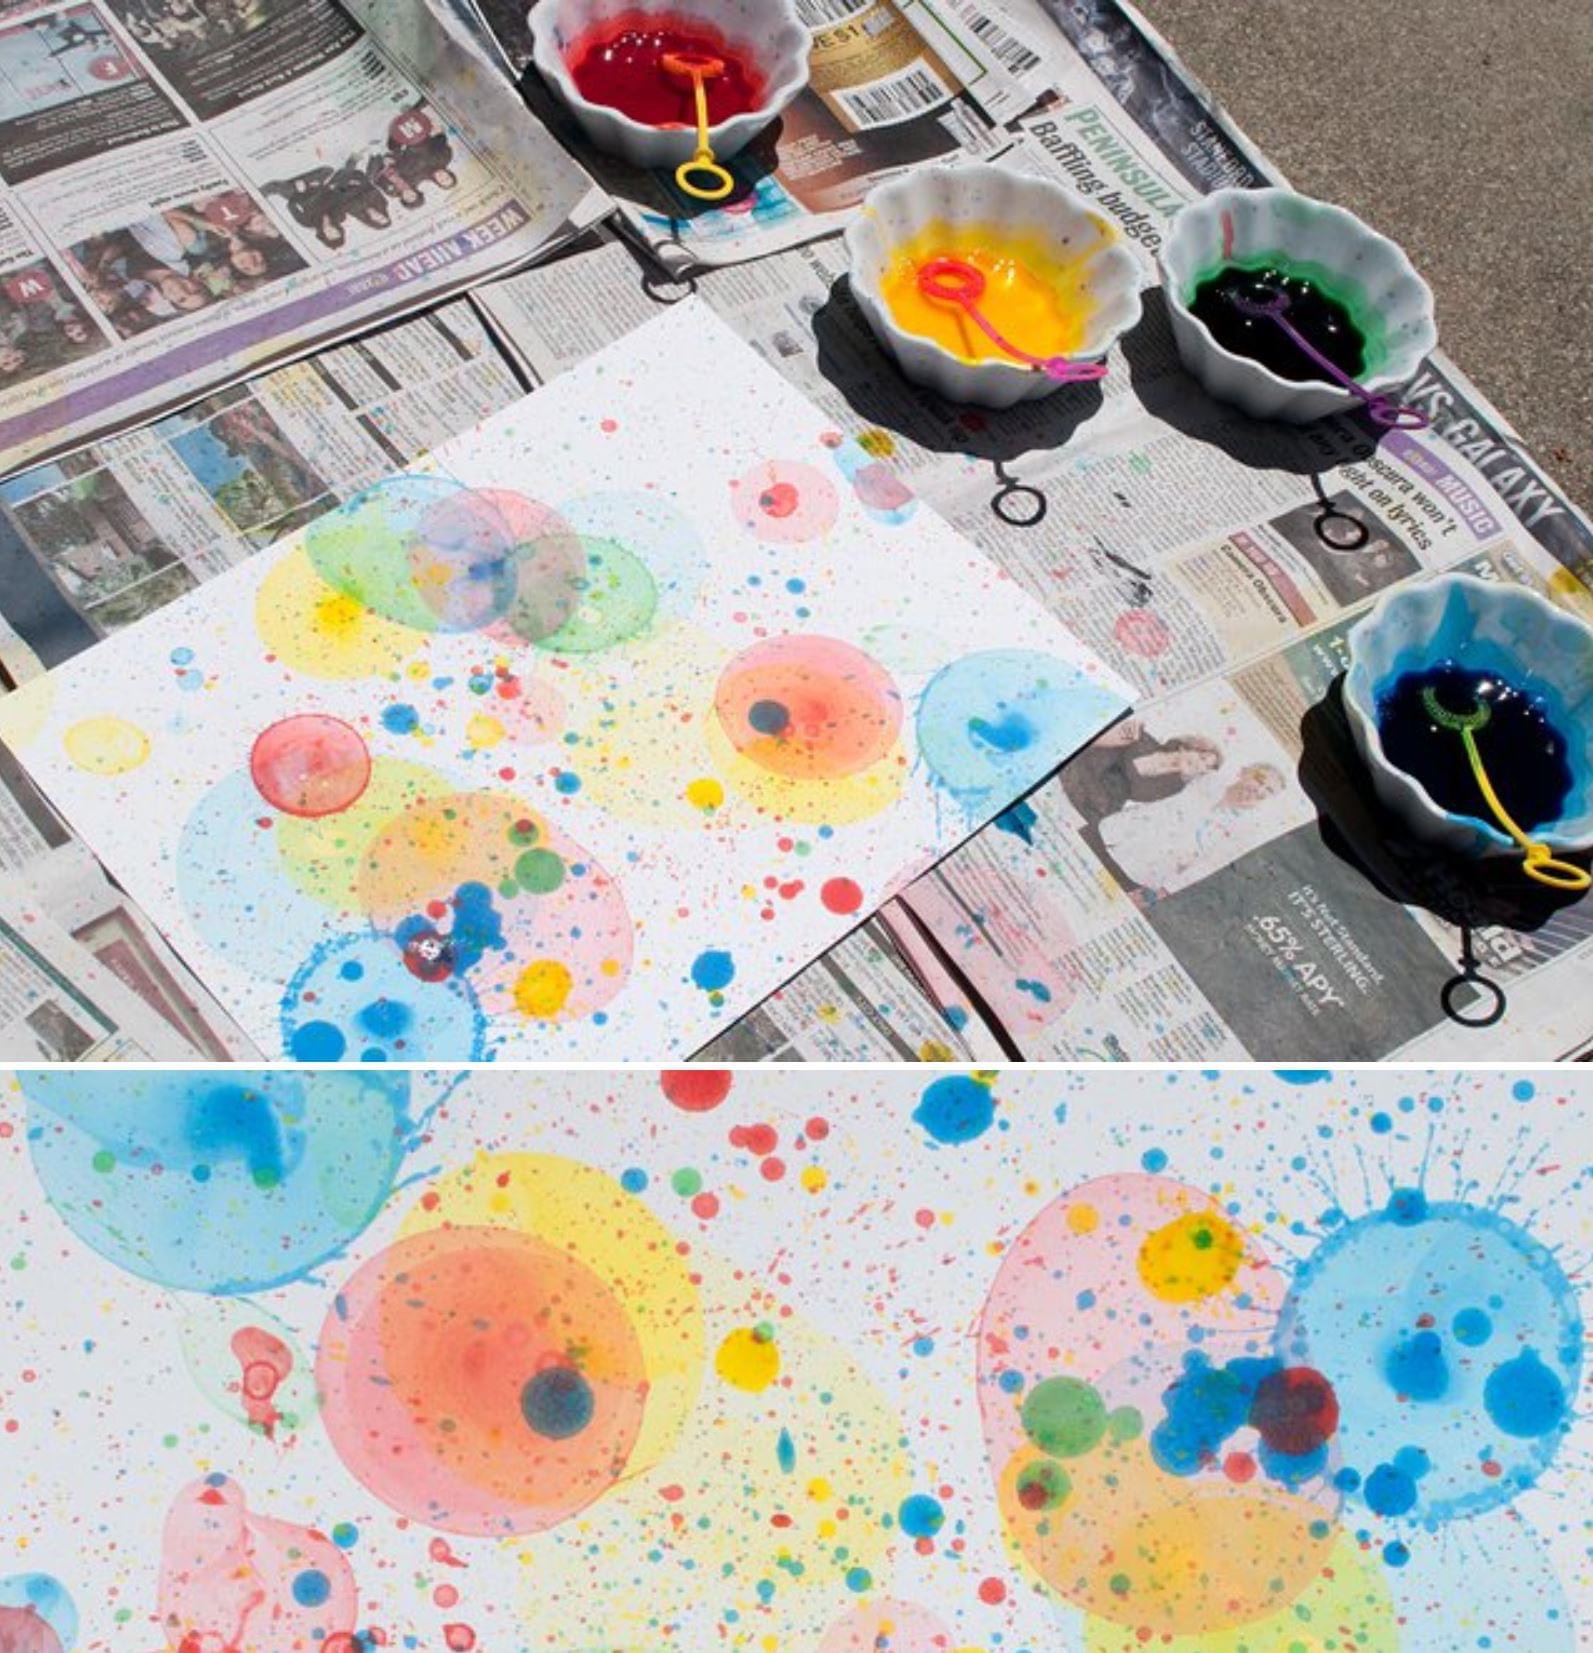 ACTIVITIES | Create a masterpiece with bubbles!